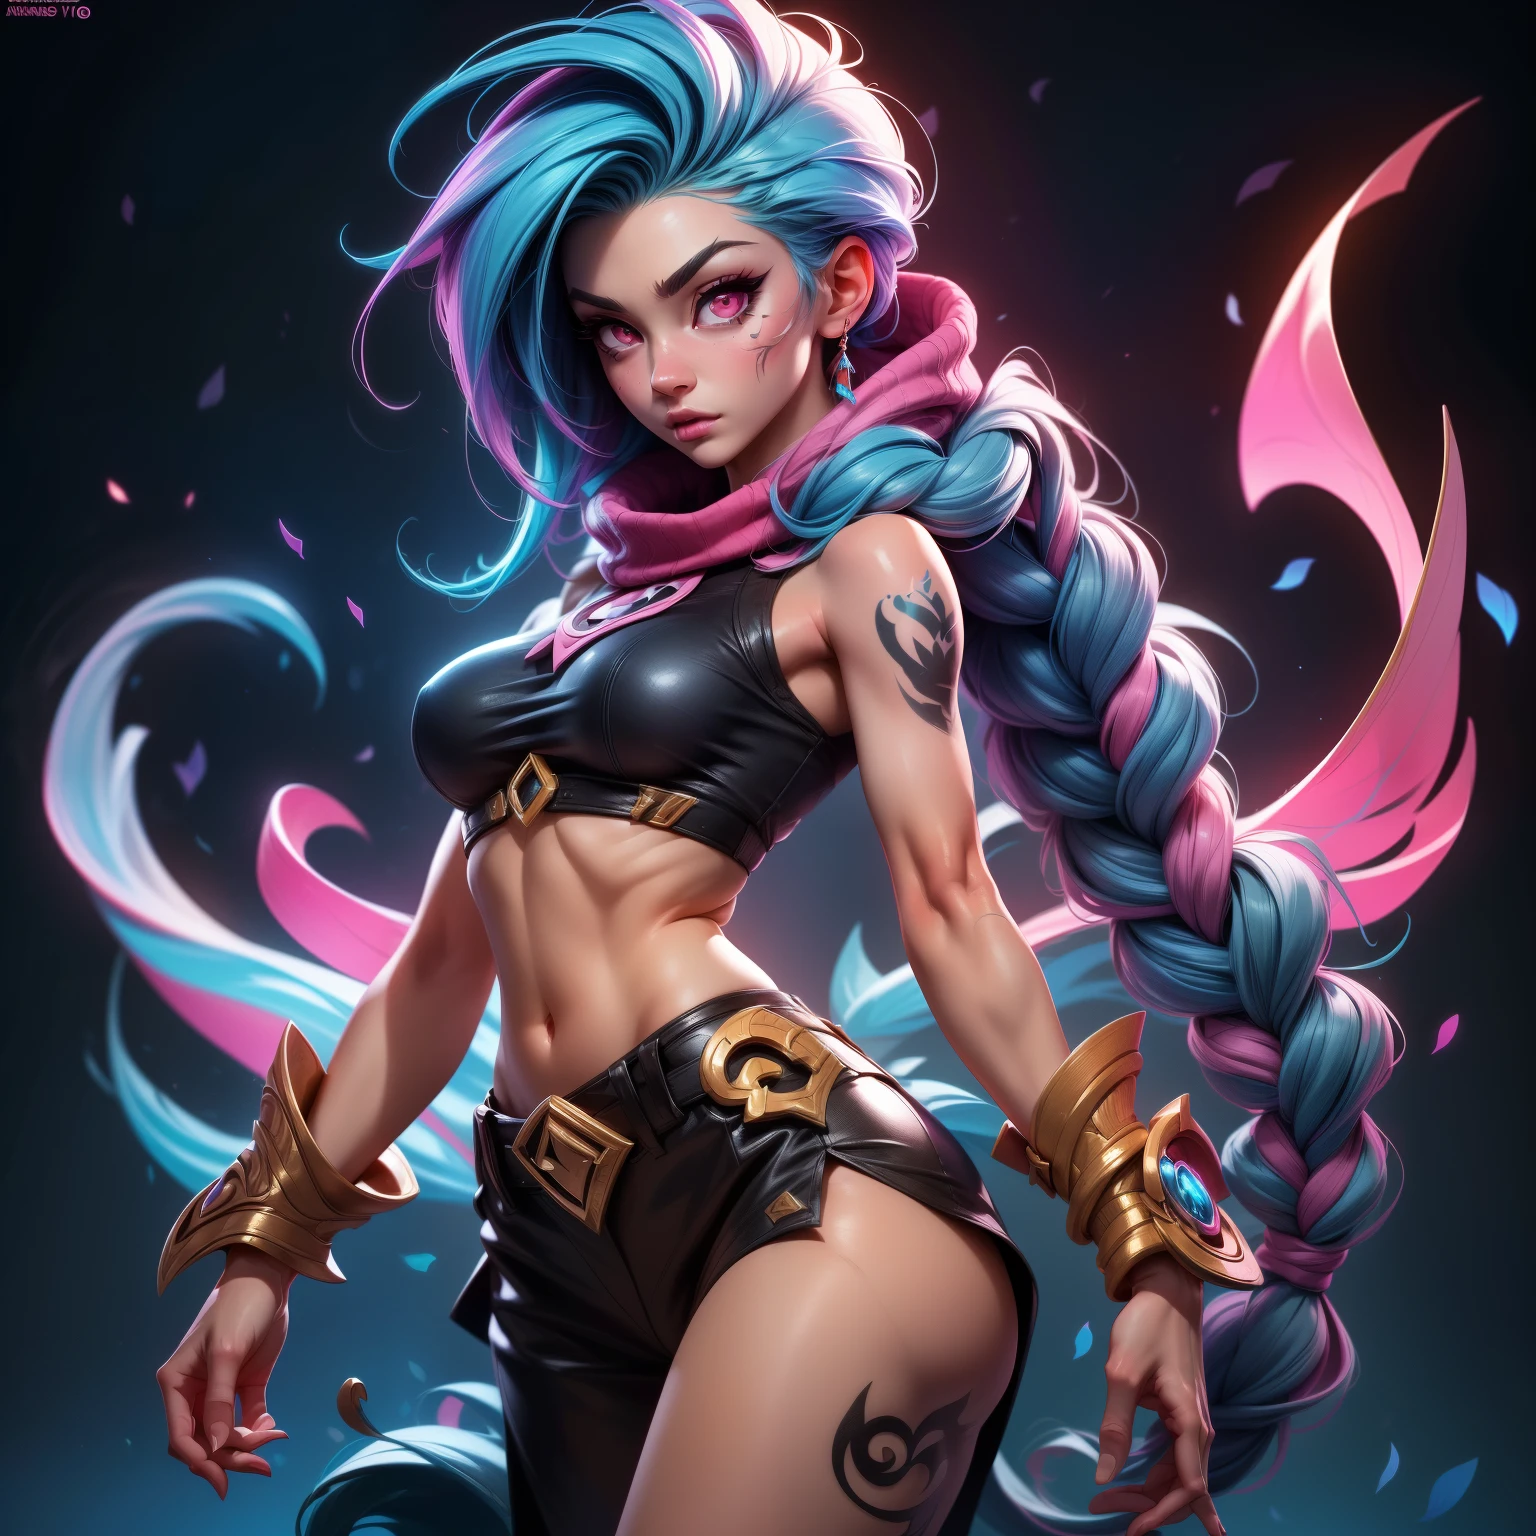 (A high resolution), (absurderes), (Best quality), (High quality), (Masterpiece), (1boy), , Glowing eyes, Pink eyes, Blue hair, Long hair, Double up braid, Jinx \(League of Legends\), arm tattoos, Crop top underboobs , Medium breasts, arms back behind, seductive  body. Sexy .